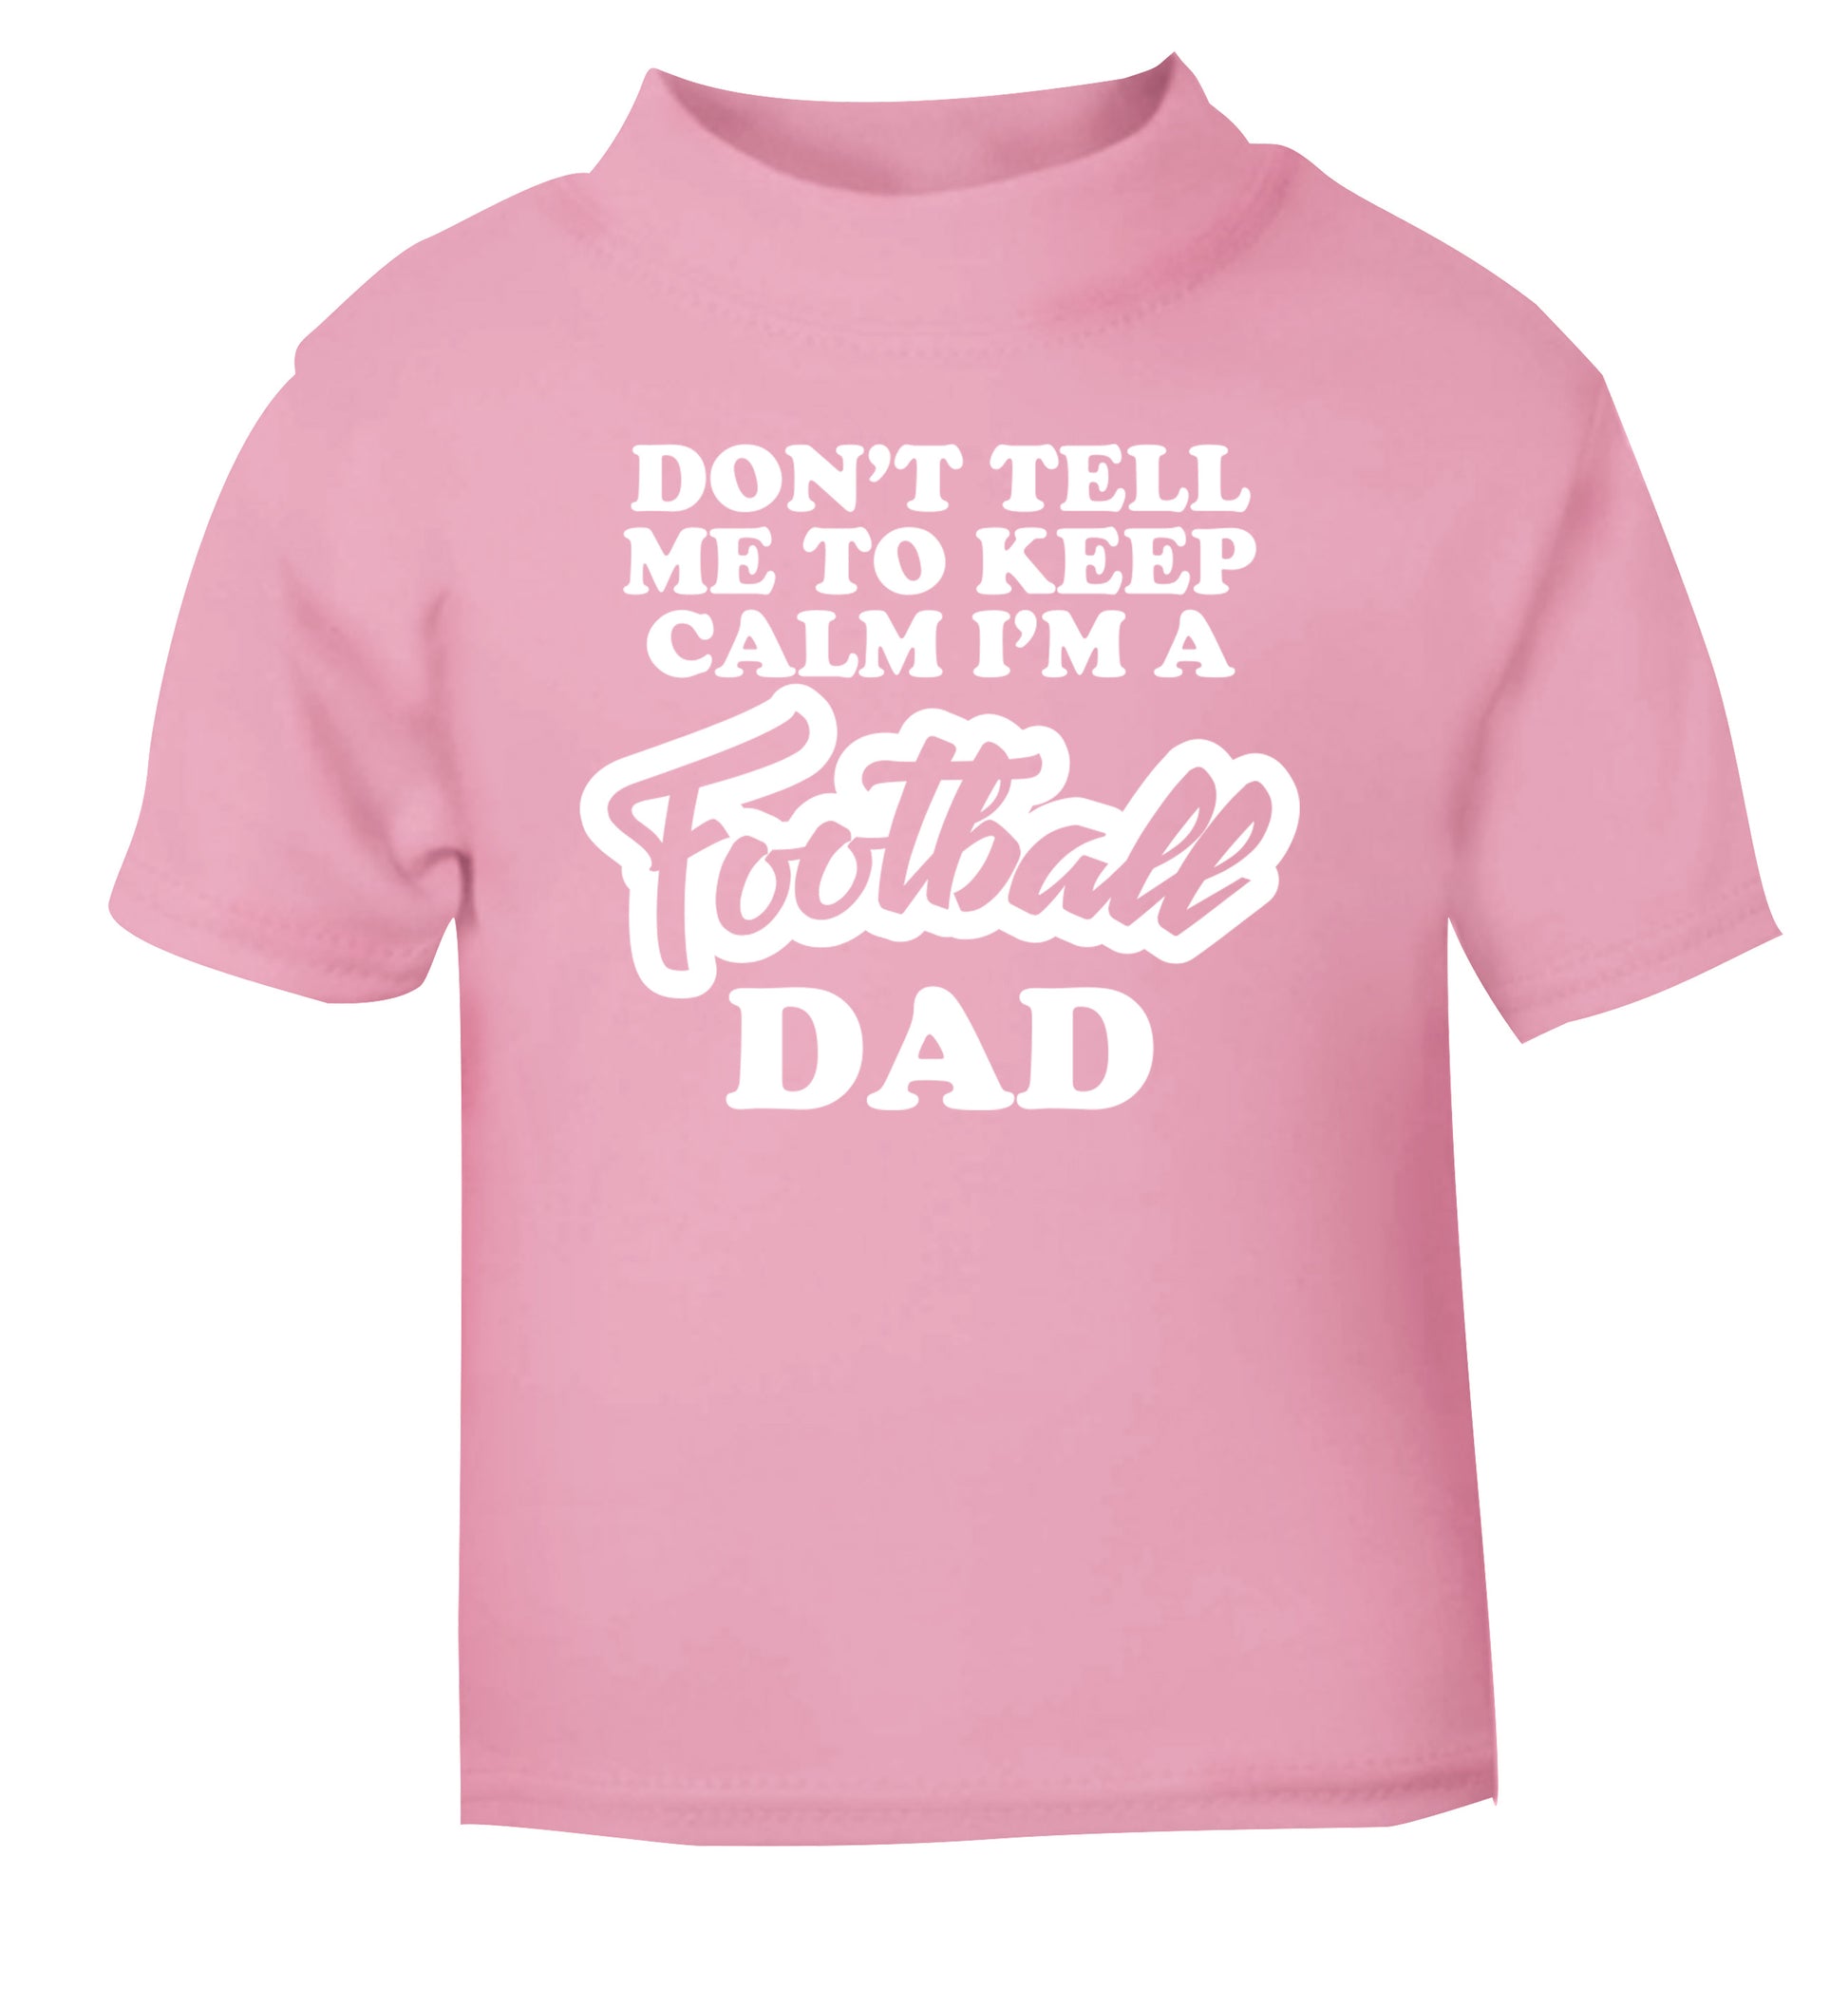 Don't tell me to keep calm I'm a football grandad light pink Baby Toddler Tshirt 2 Years